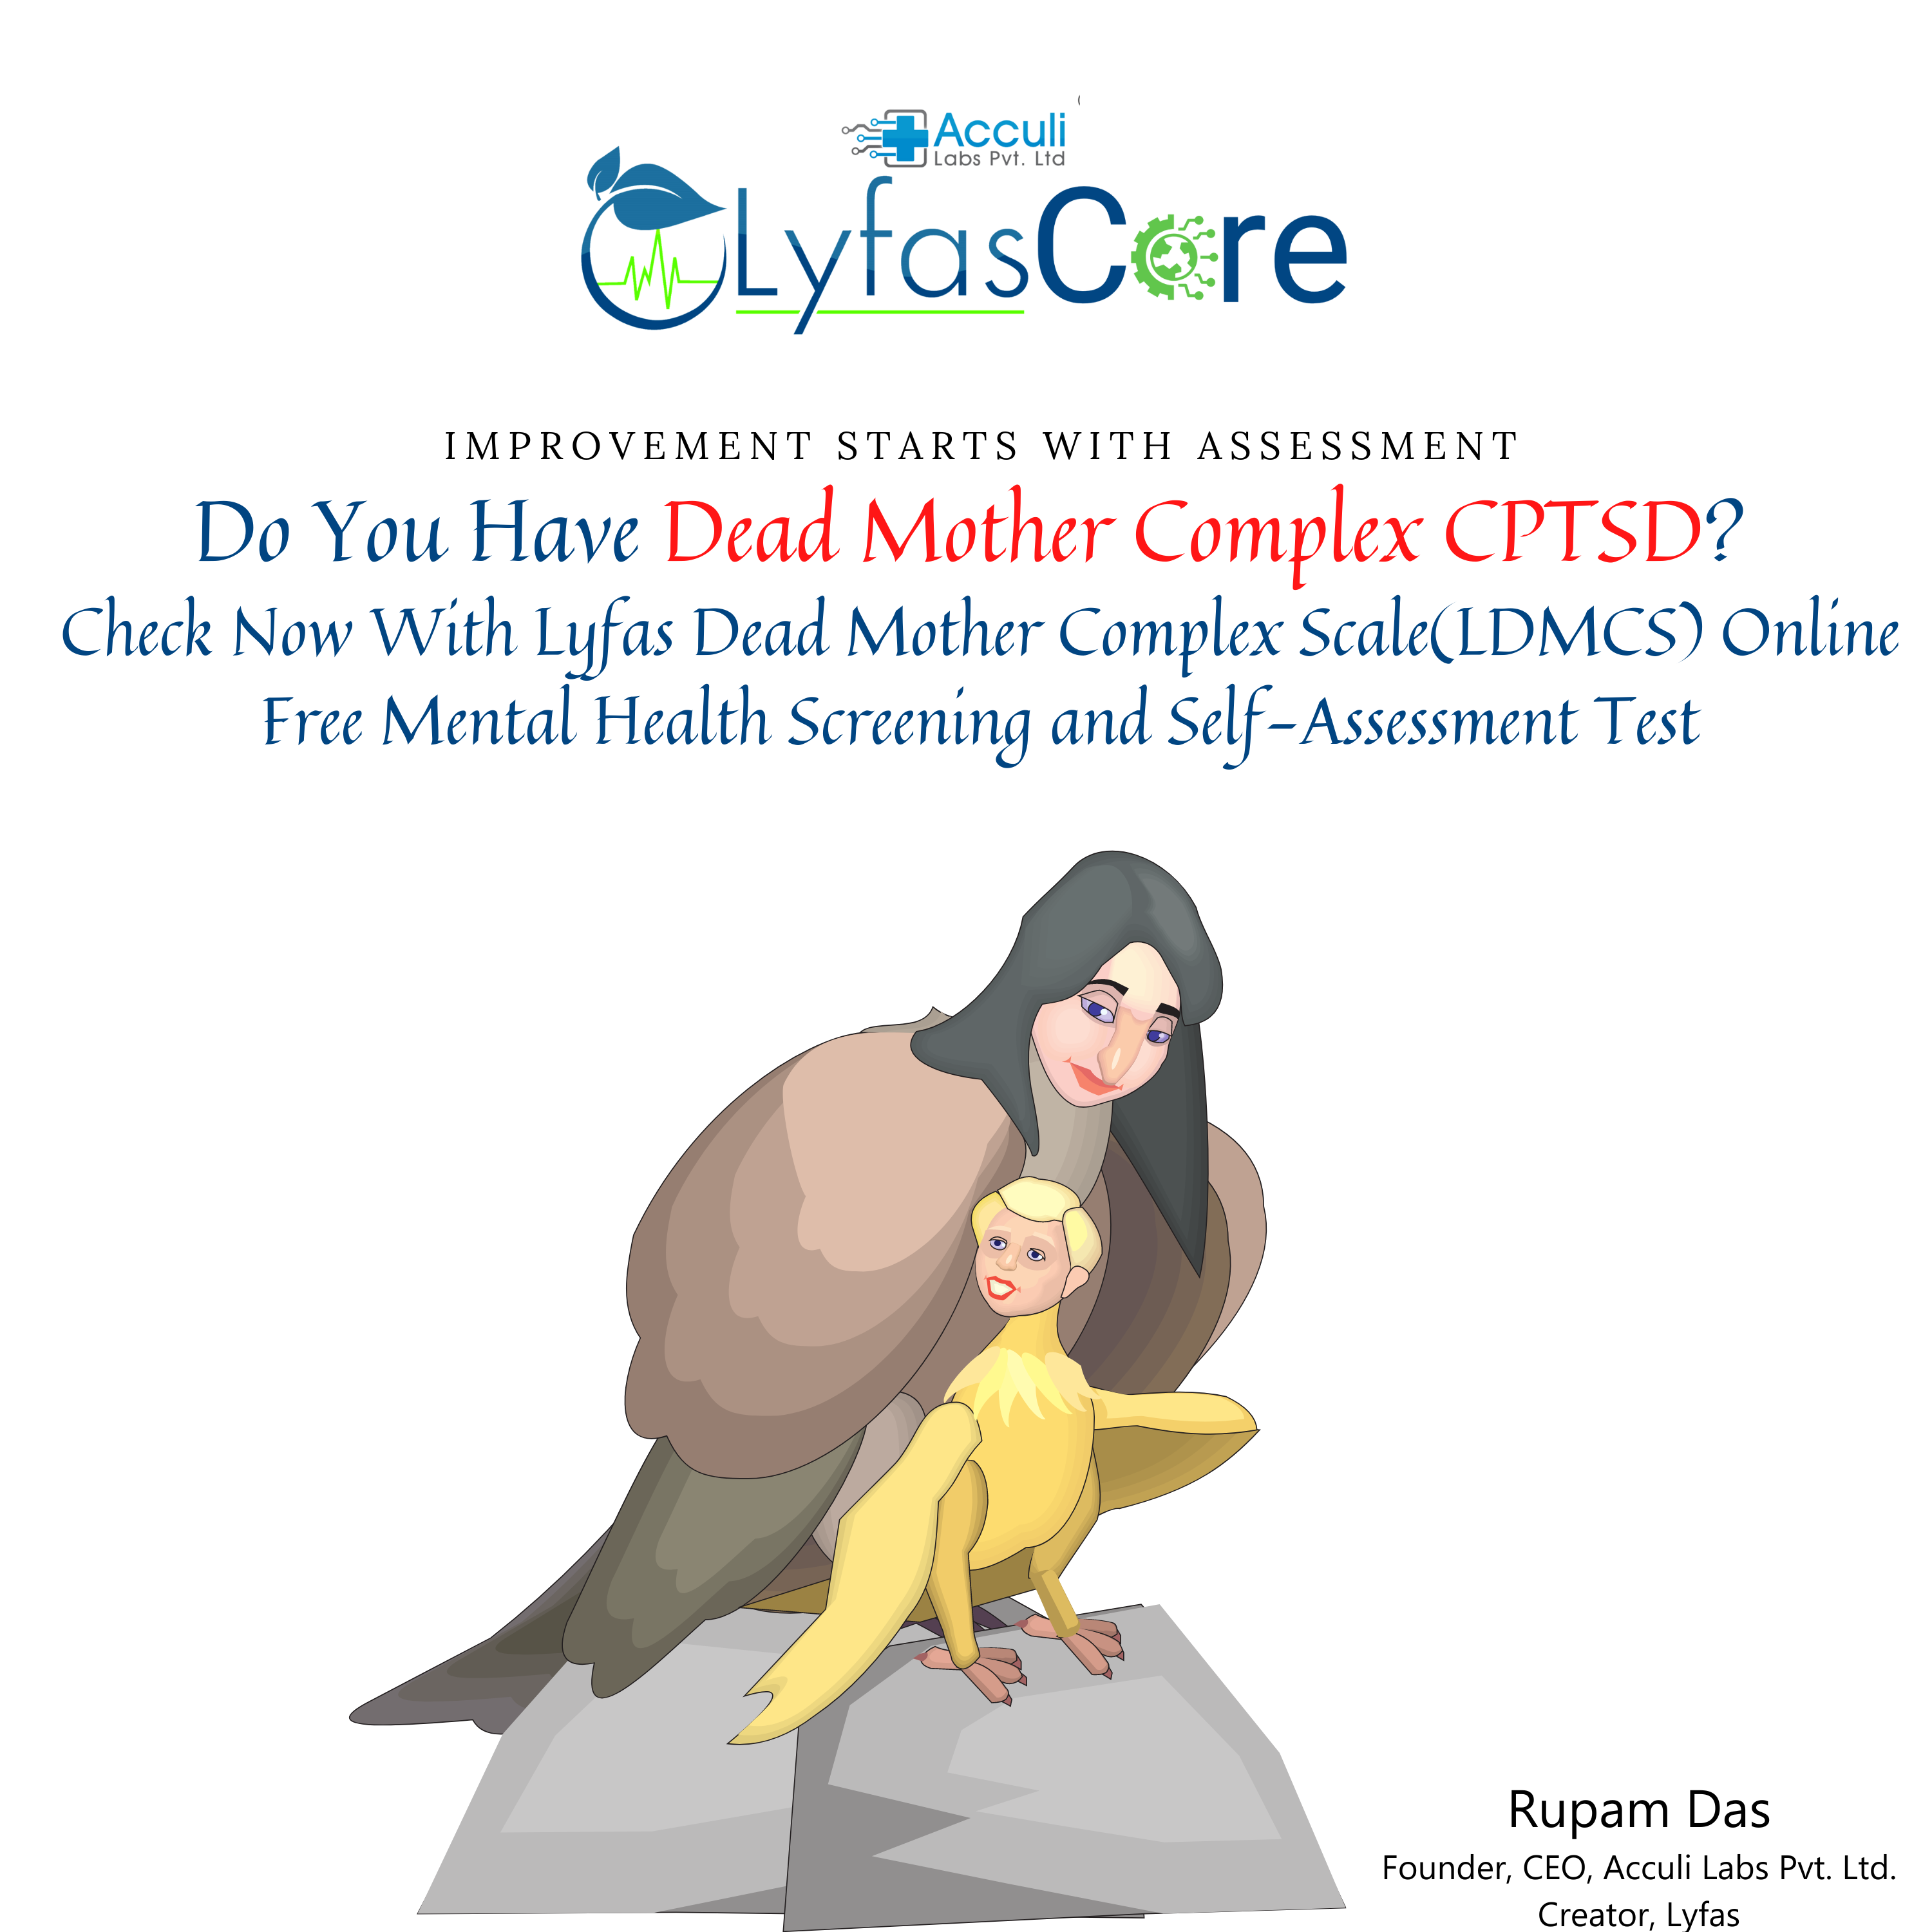 Do You Have Dead Mother Complex CPTSD? Check Now With Lyfas Dead Mother Complex Scale(LDMCS) Online Free Mental Health Screening and Self-Assessment Test